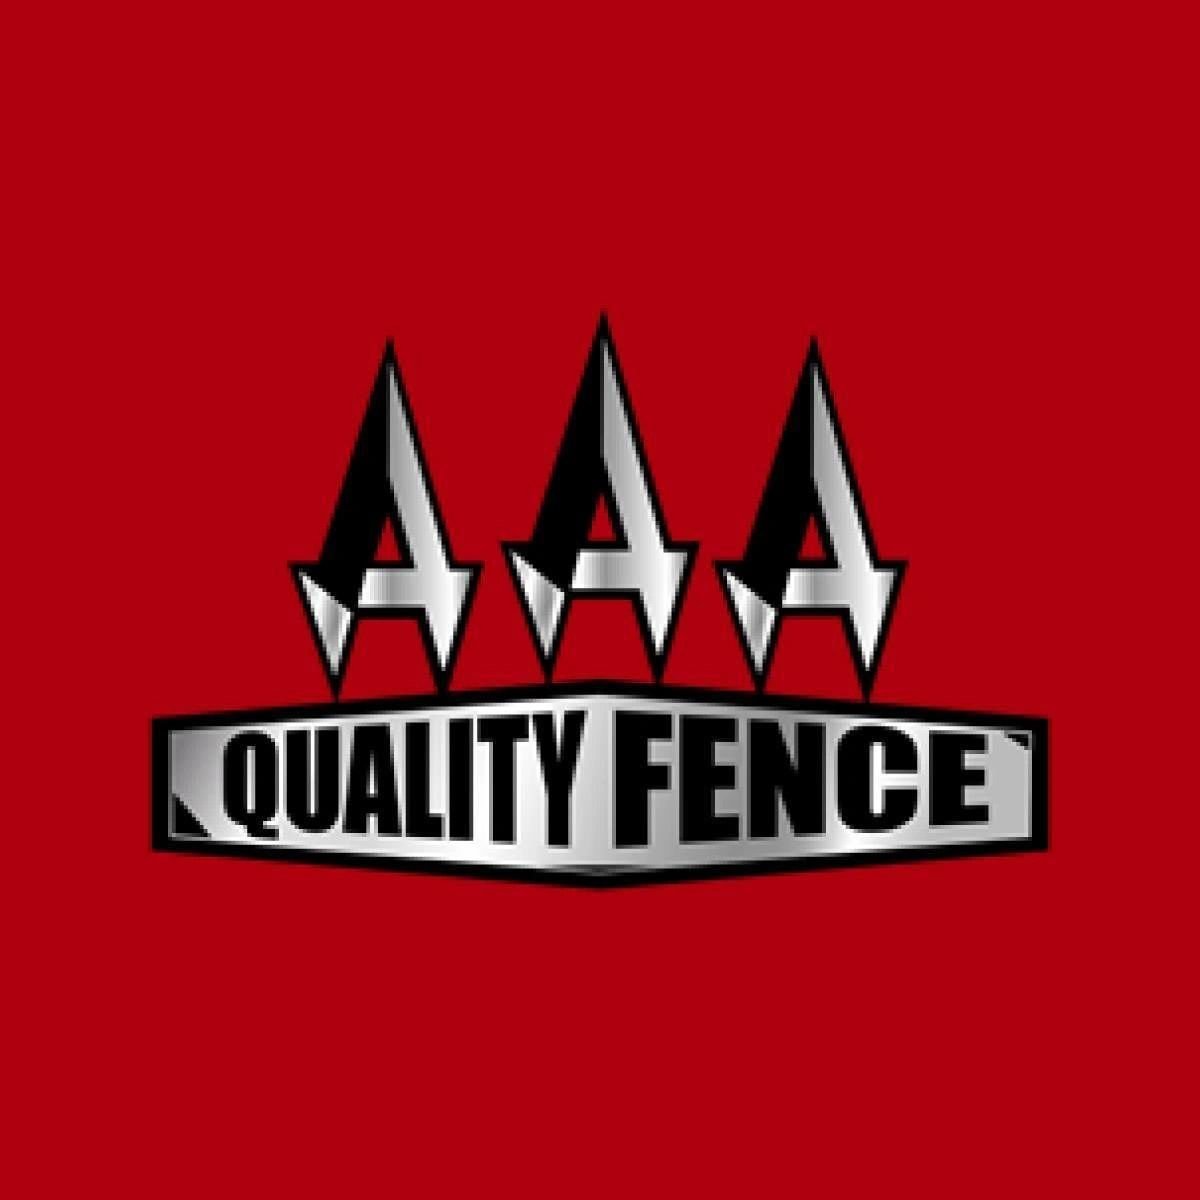 When it comes to quality fencing, we’re proud to be the company our community trusts most. Visit our website to schedule a free estimate!